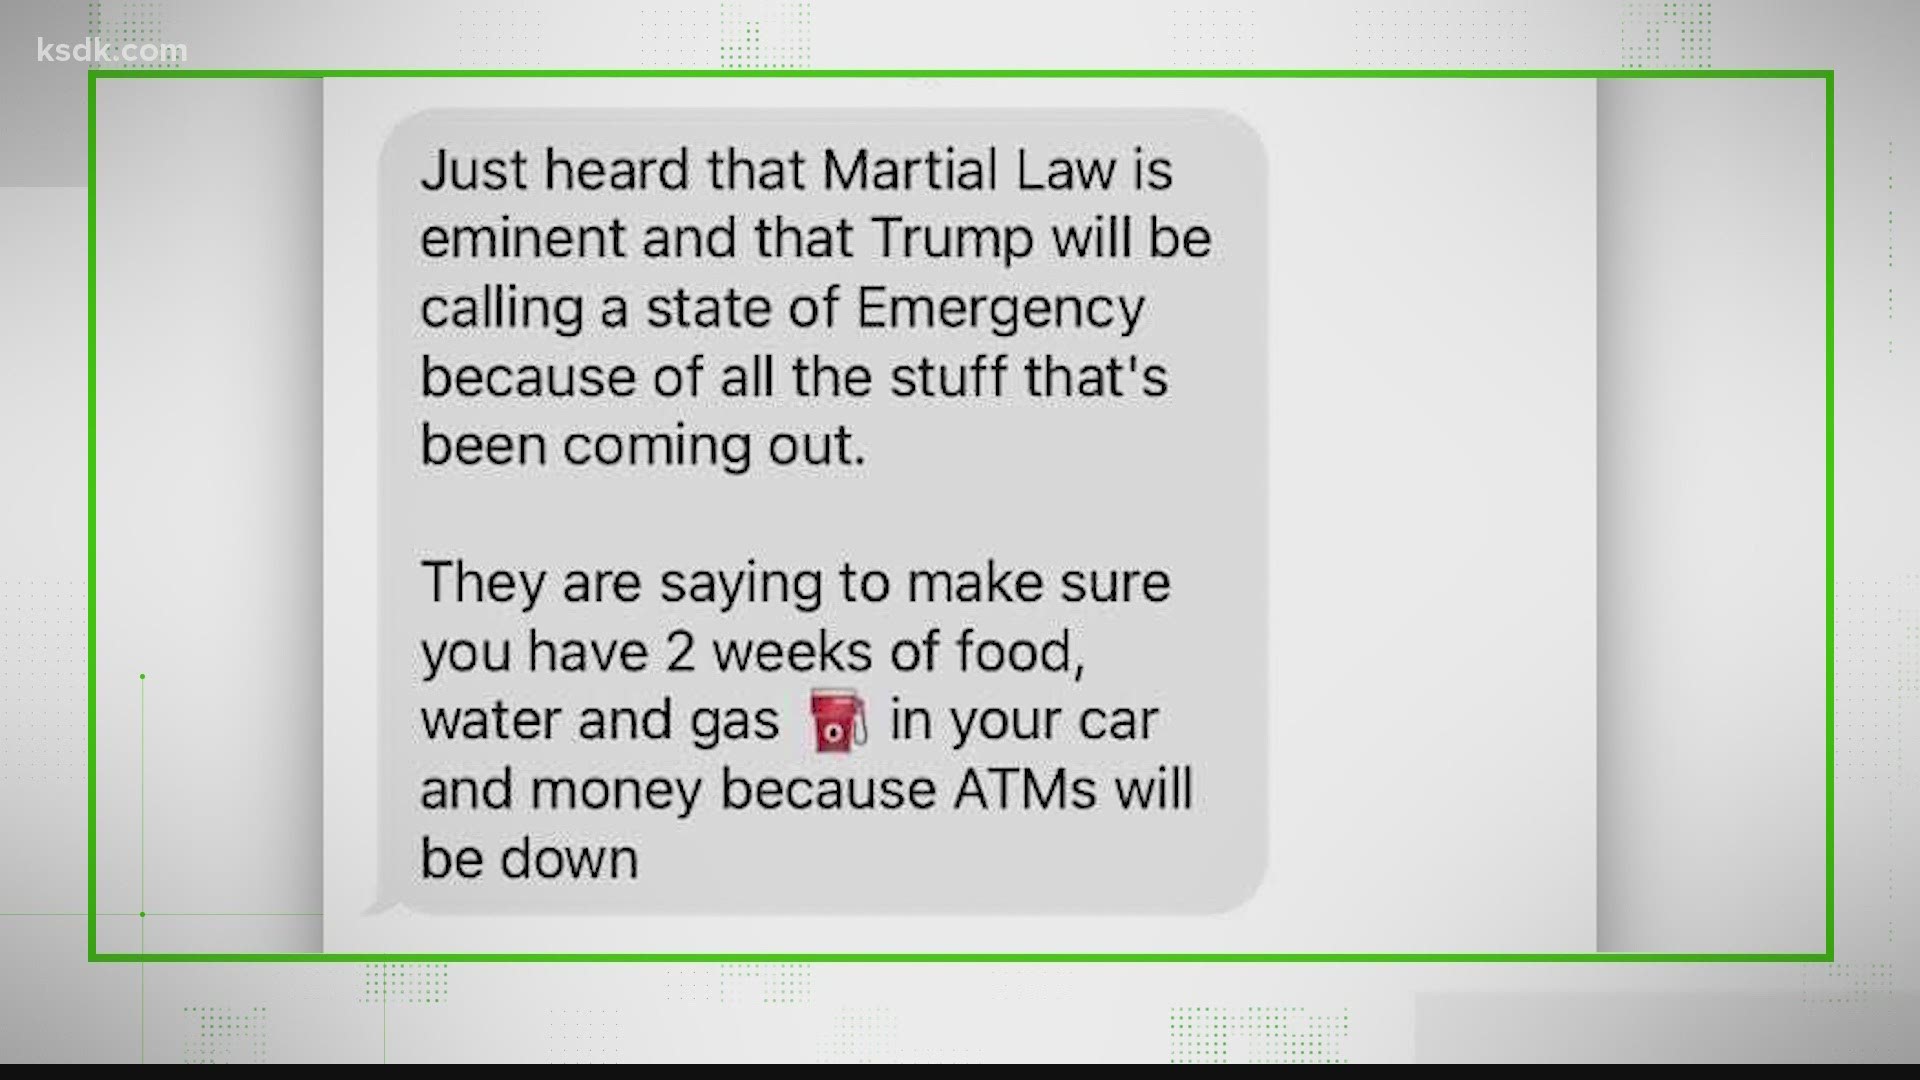 A viral claim says President Trump will declare martial law. That’s why our team set out to VERIFY